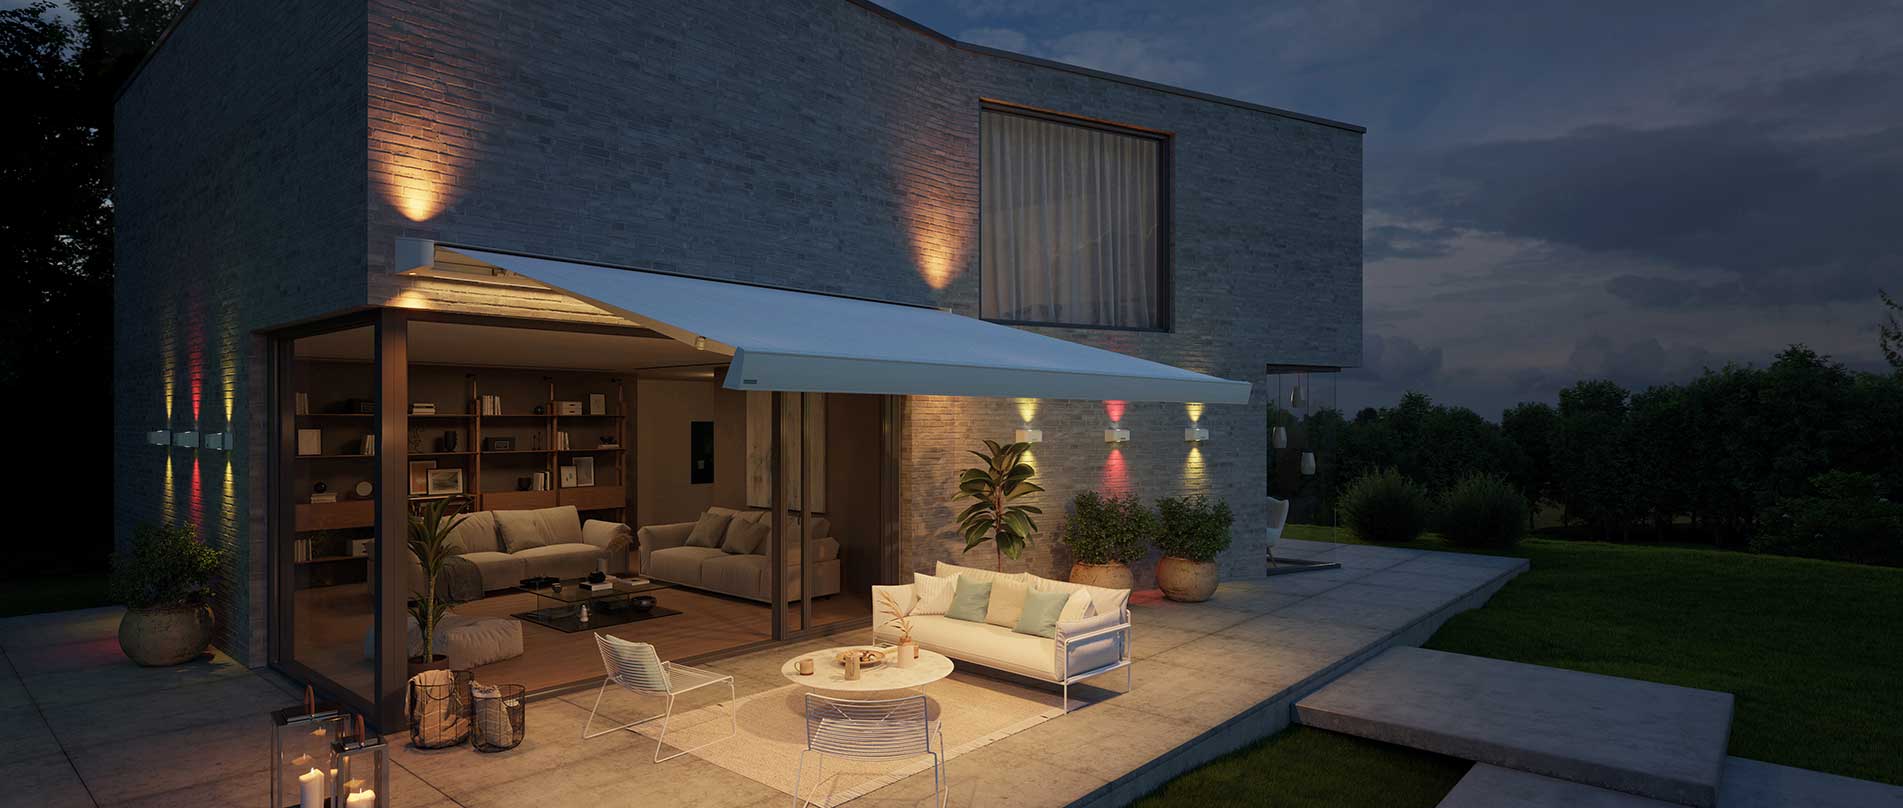 The MX-4 Markilux Awning